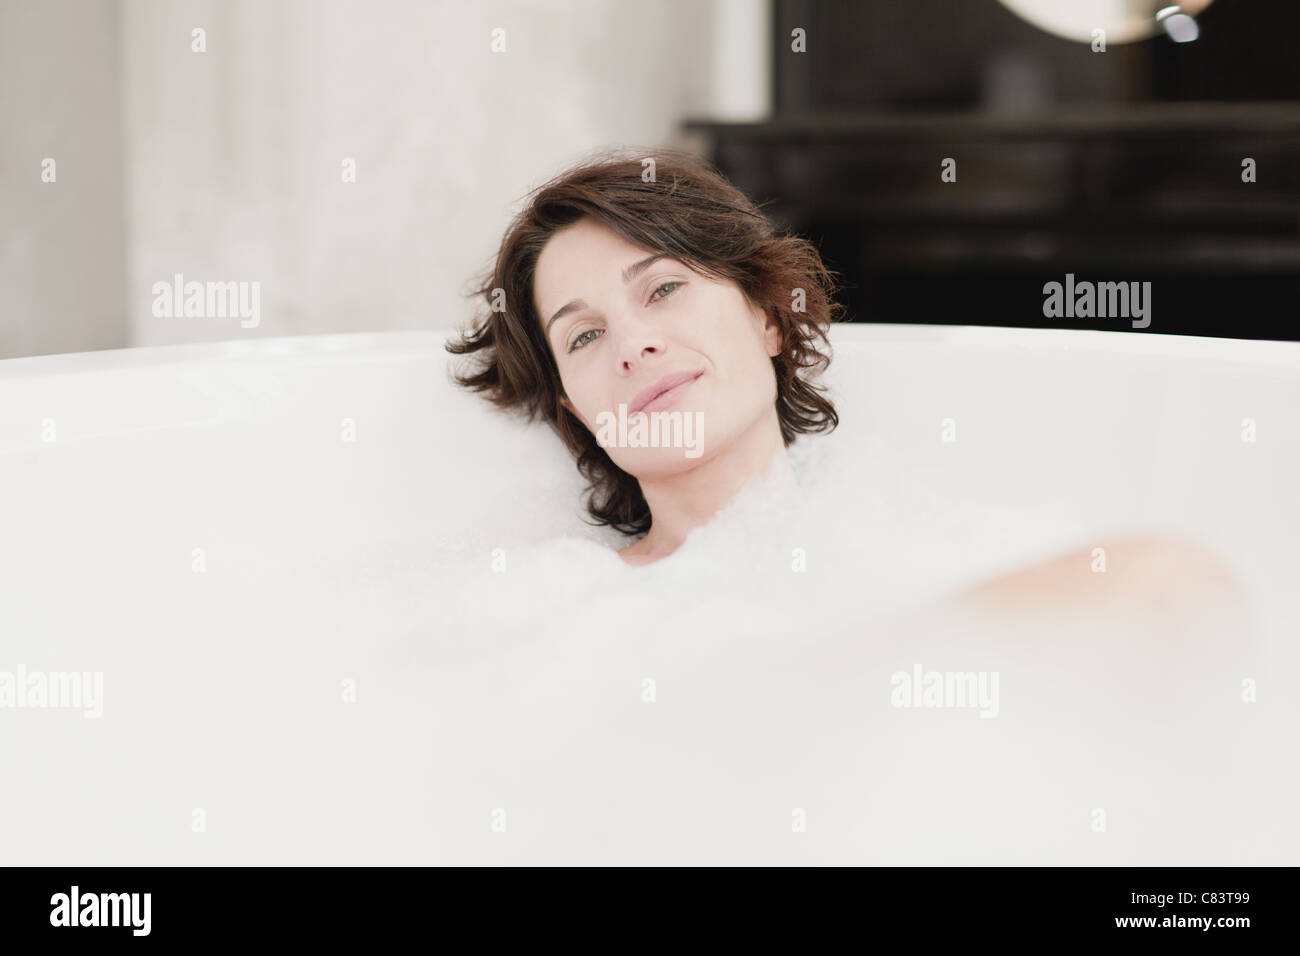 Young Woman Take Bubble Bath. Stock Photo, Picture and Royalty Free Image.  Image 12341170.